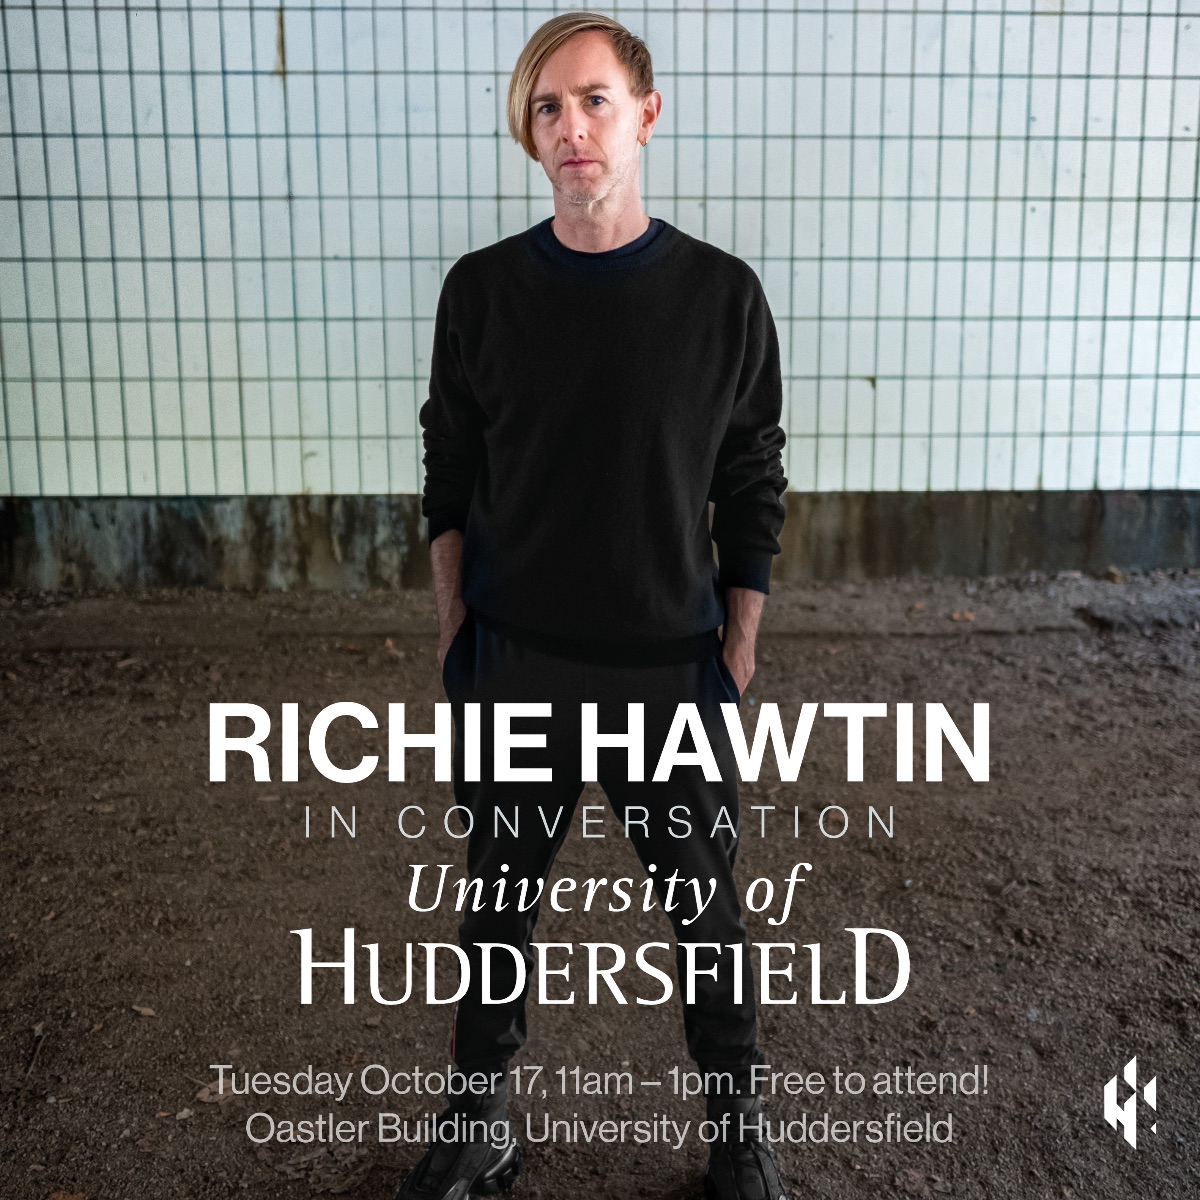 Richie Hawtin; the electronic music visionary and techno pioneer unveils winning PhD Scholarship at the University of Huddersfield